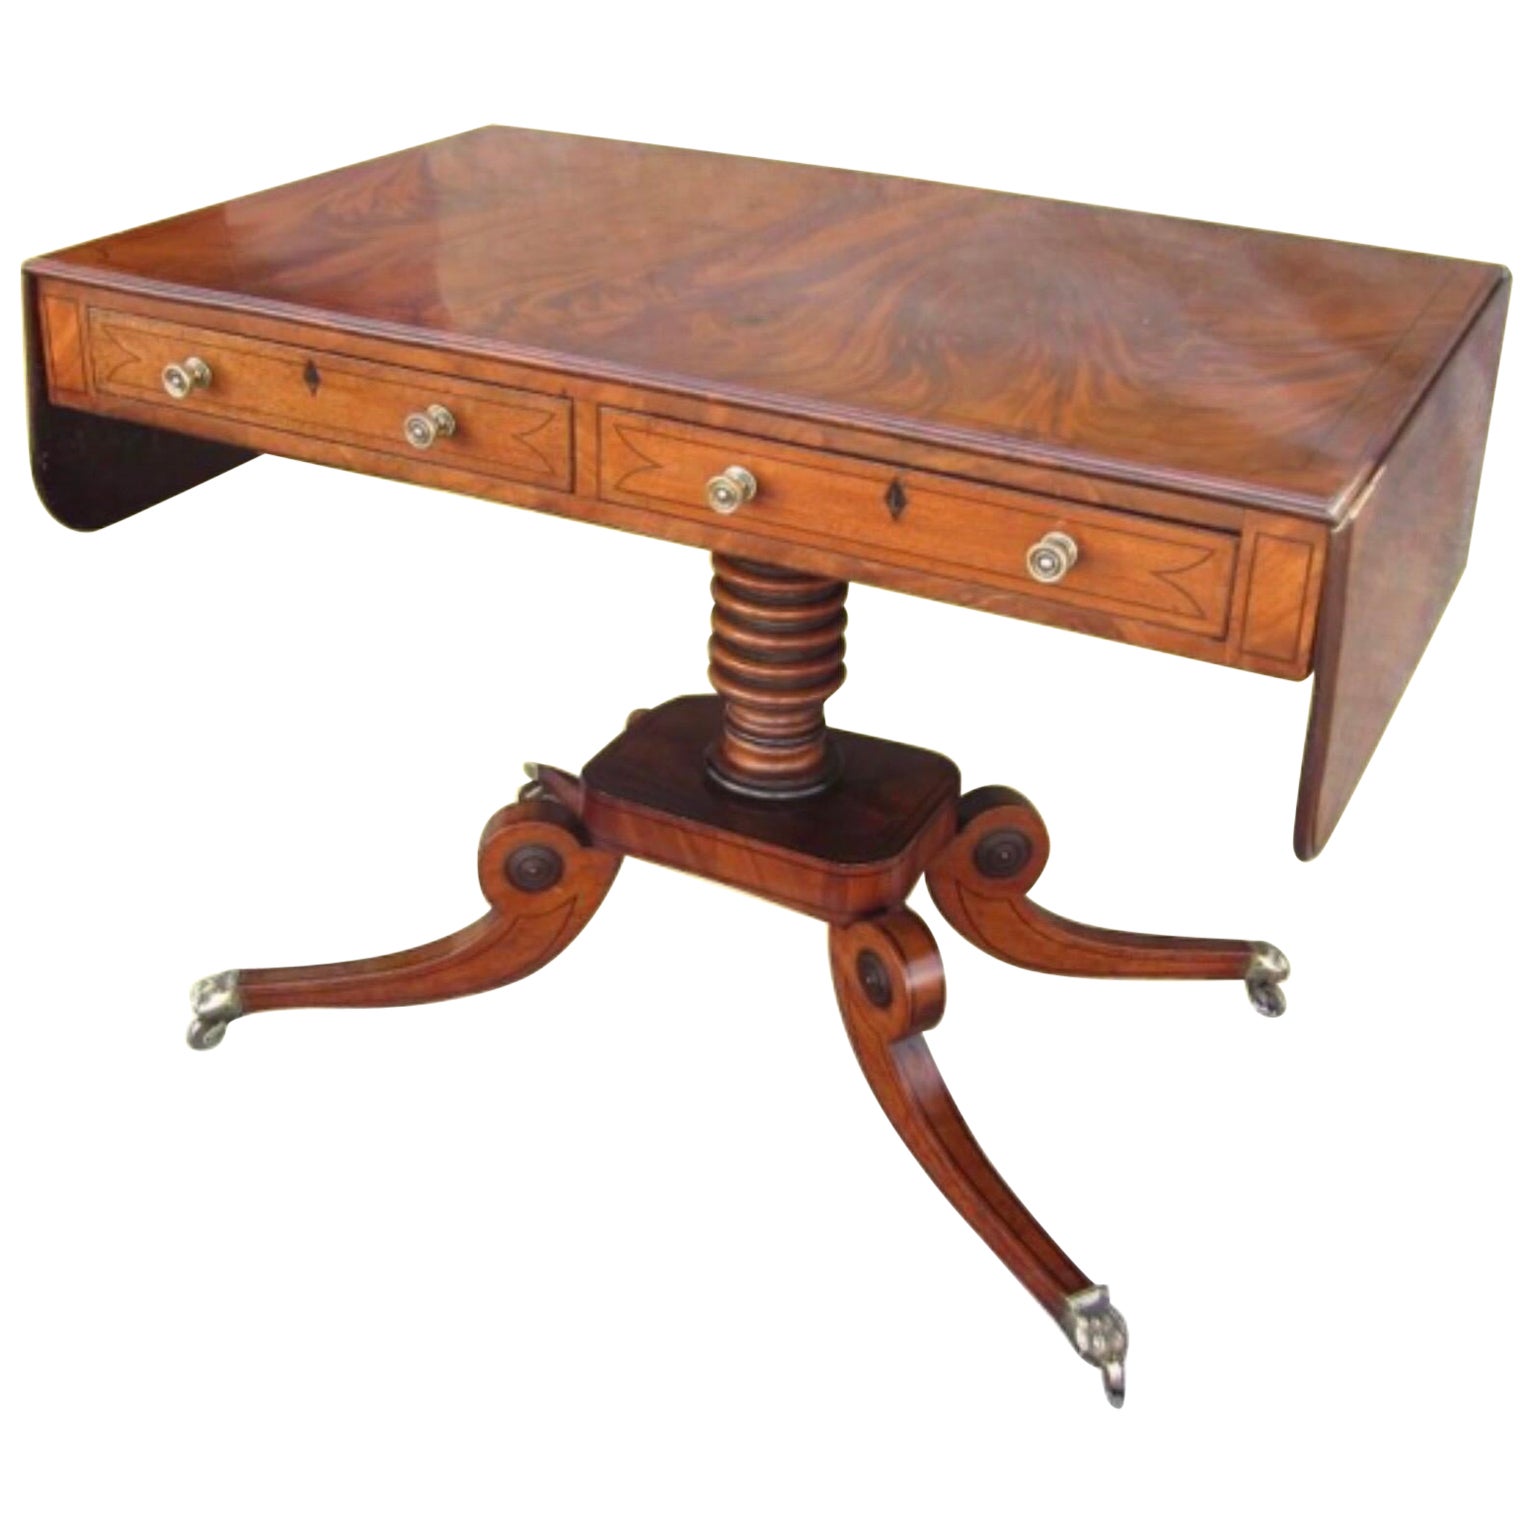 Antique Period Regency Inlaid Mahogany Sofa Table For Sale